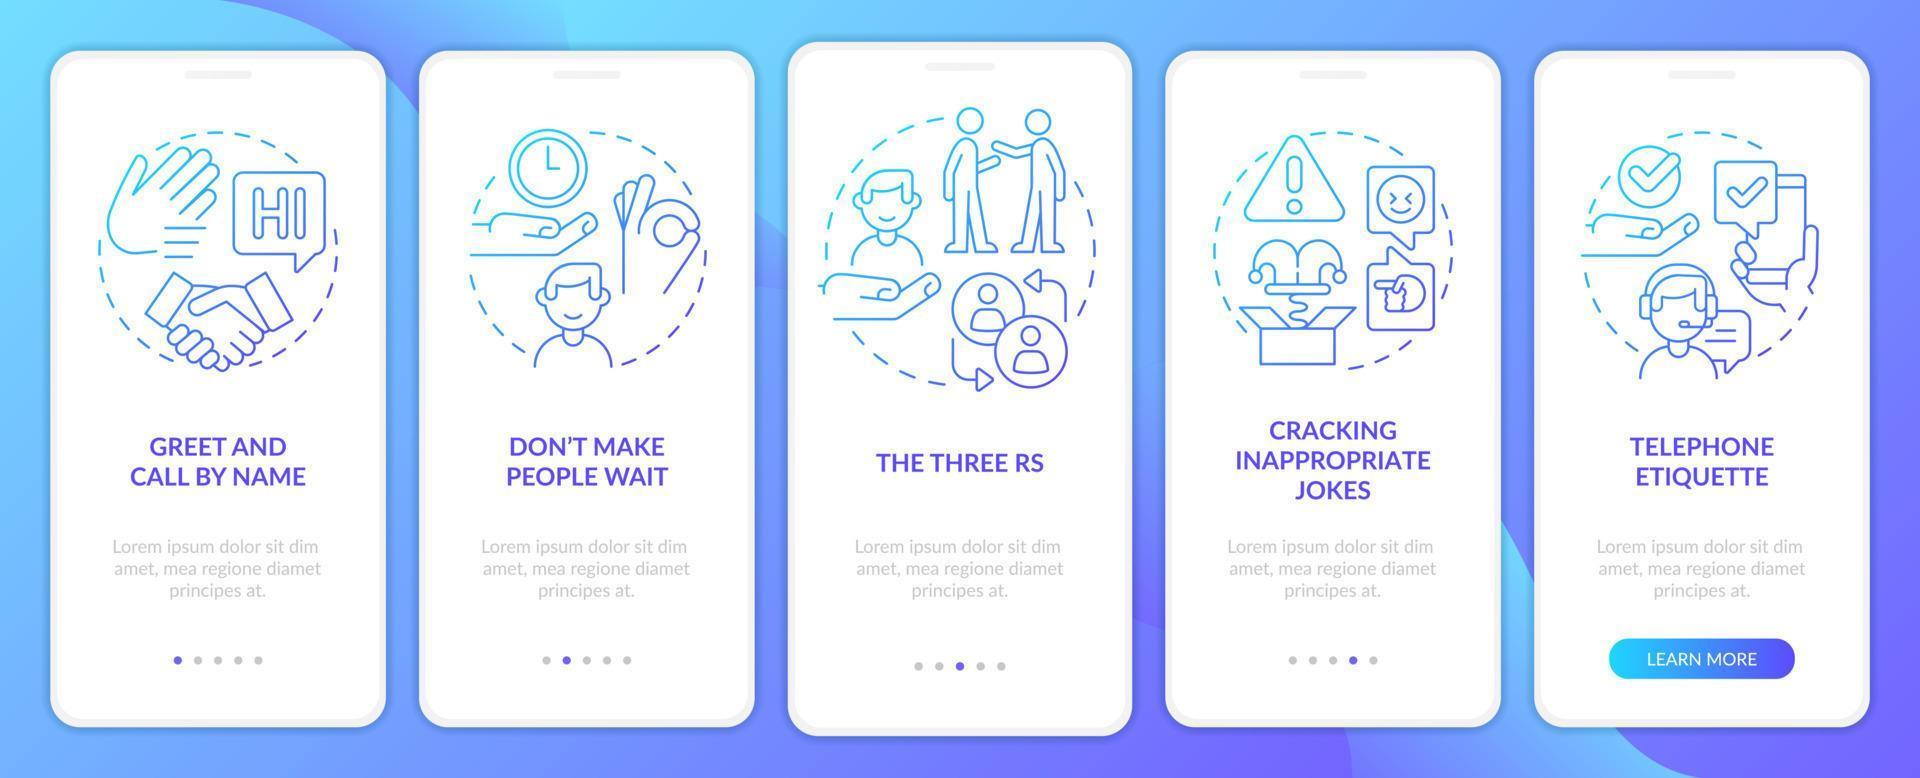 Business etiquette blue gradient onboarding mobile app screen. Walkthrough 5 steps graphic instructions pages with linear concepts. UI, UX, GUI template. vector